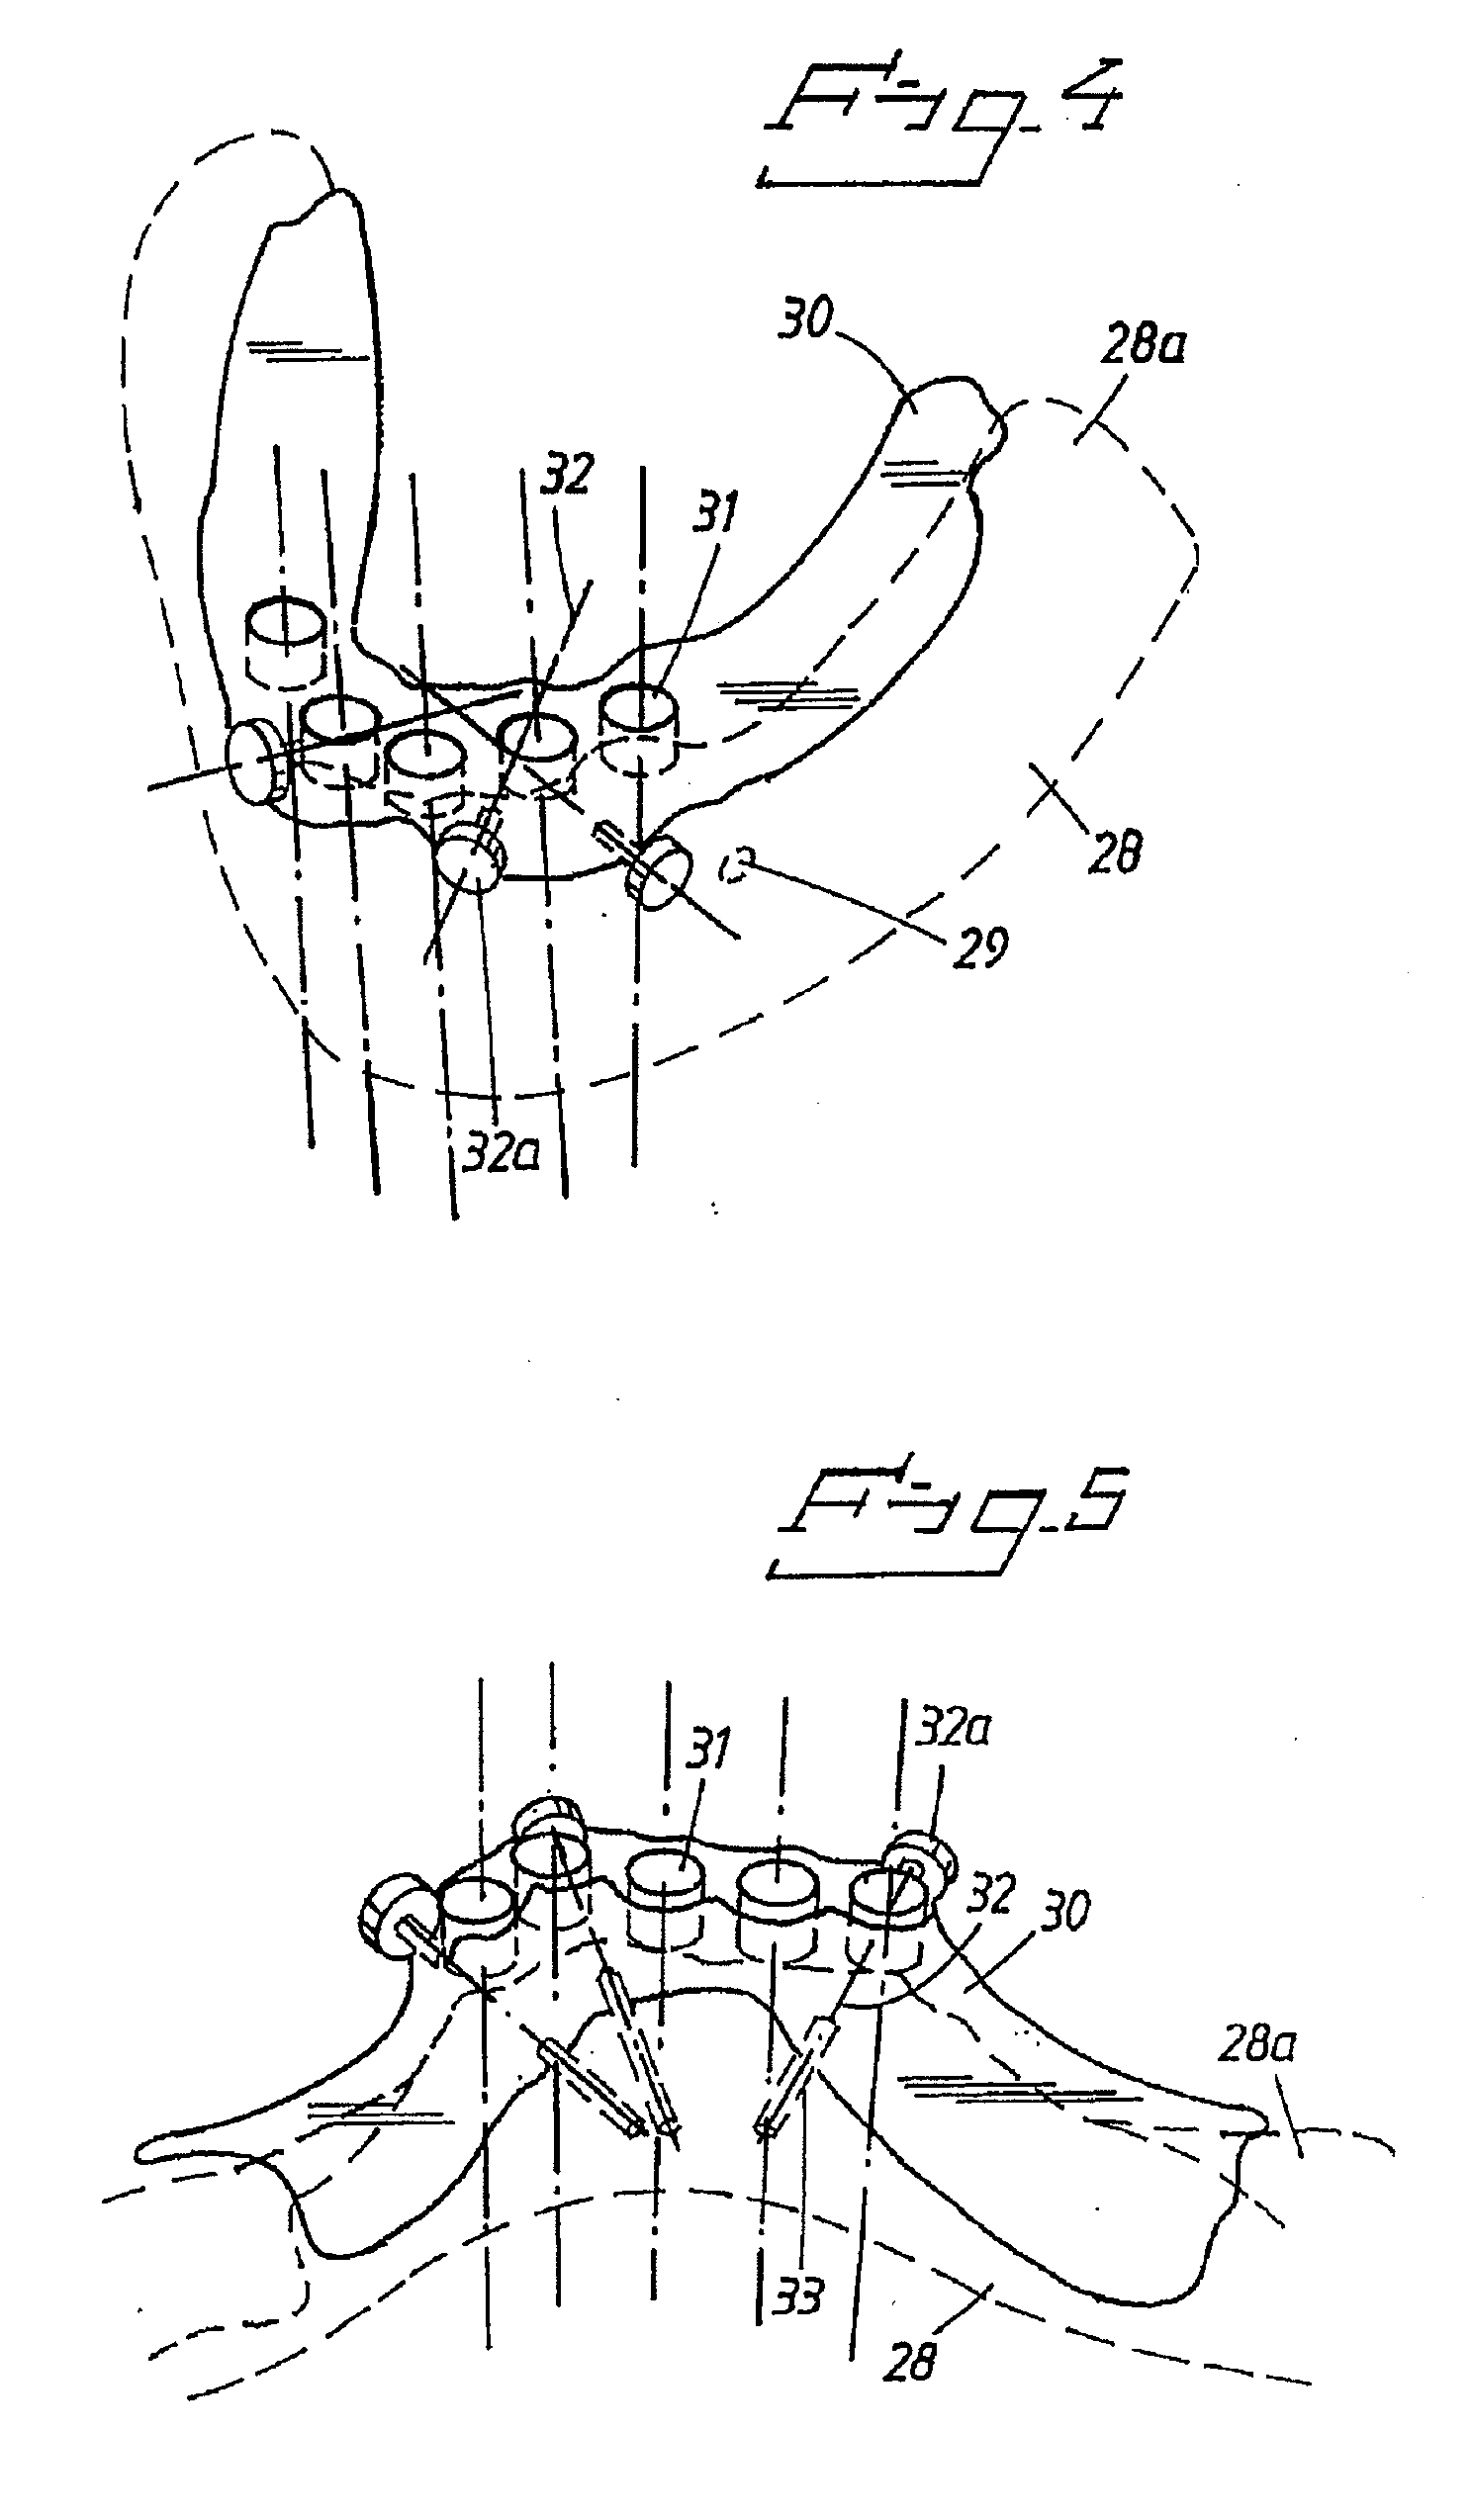 Arrangement and device for using a template to form holes for implants in bone, preferably jaw bone